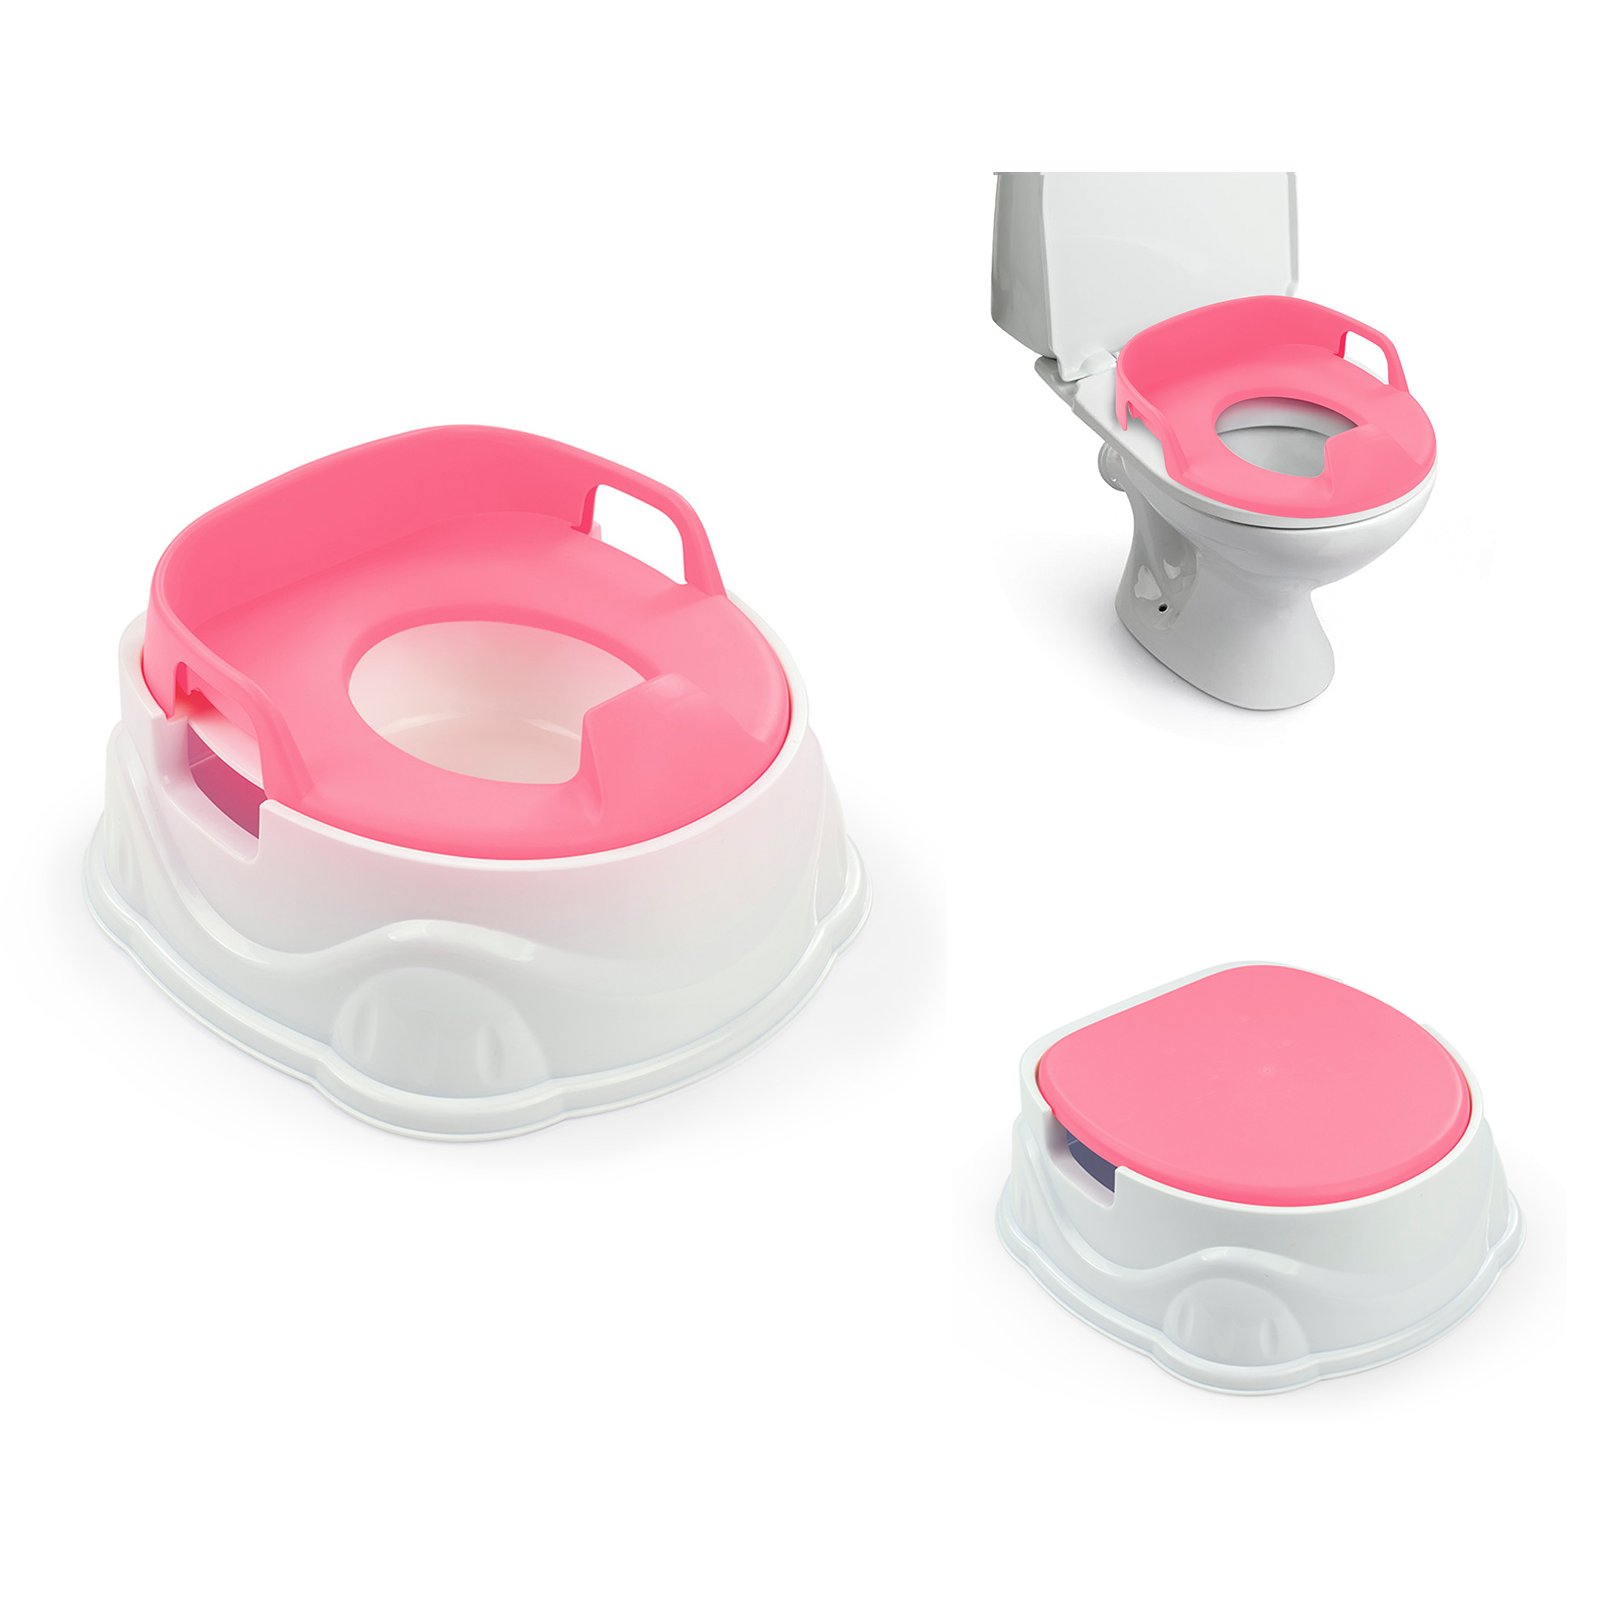 Kids 3 in 1 Potty, Toilet Seat and Step Stool - Pink